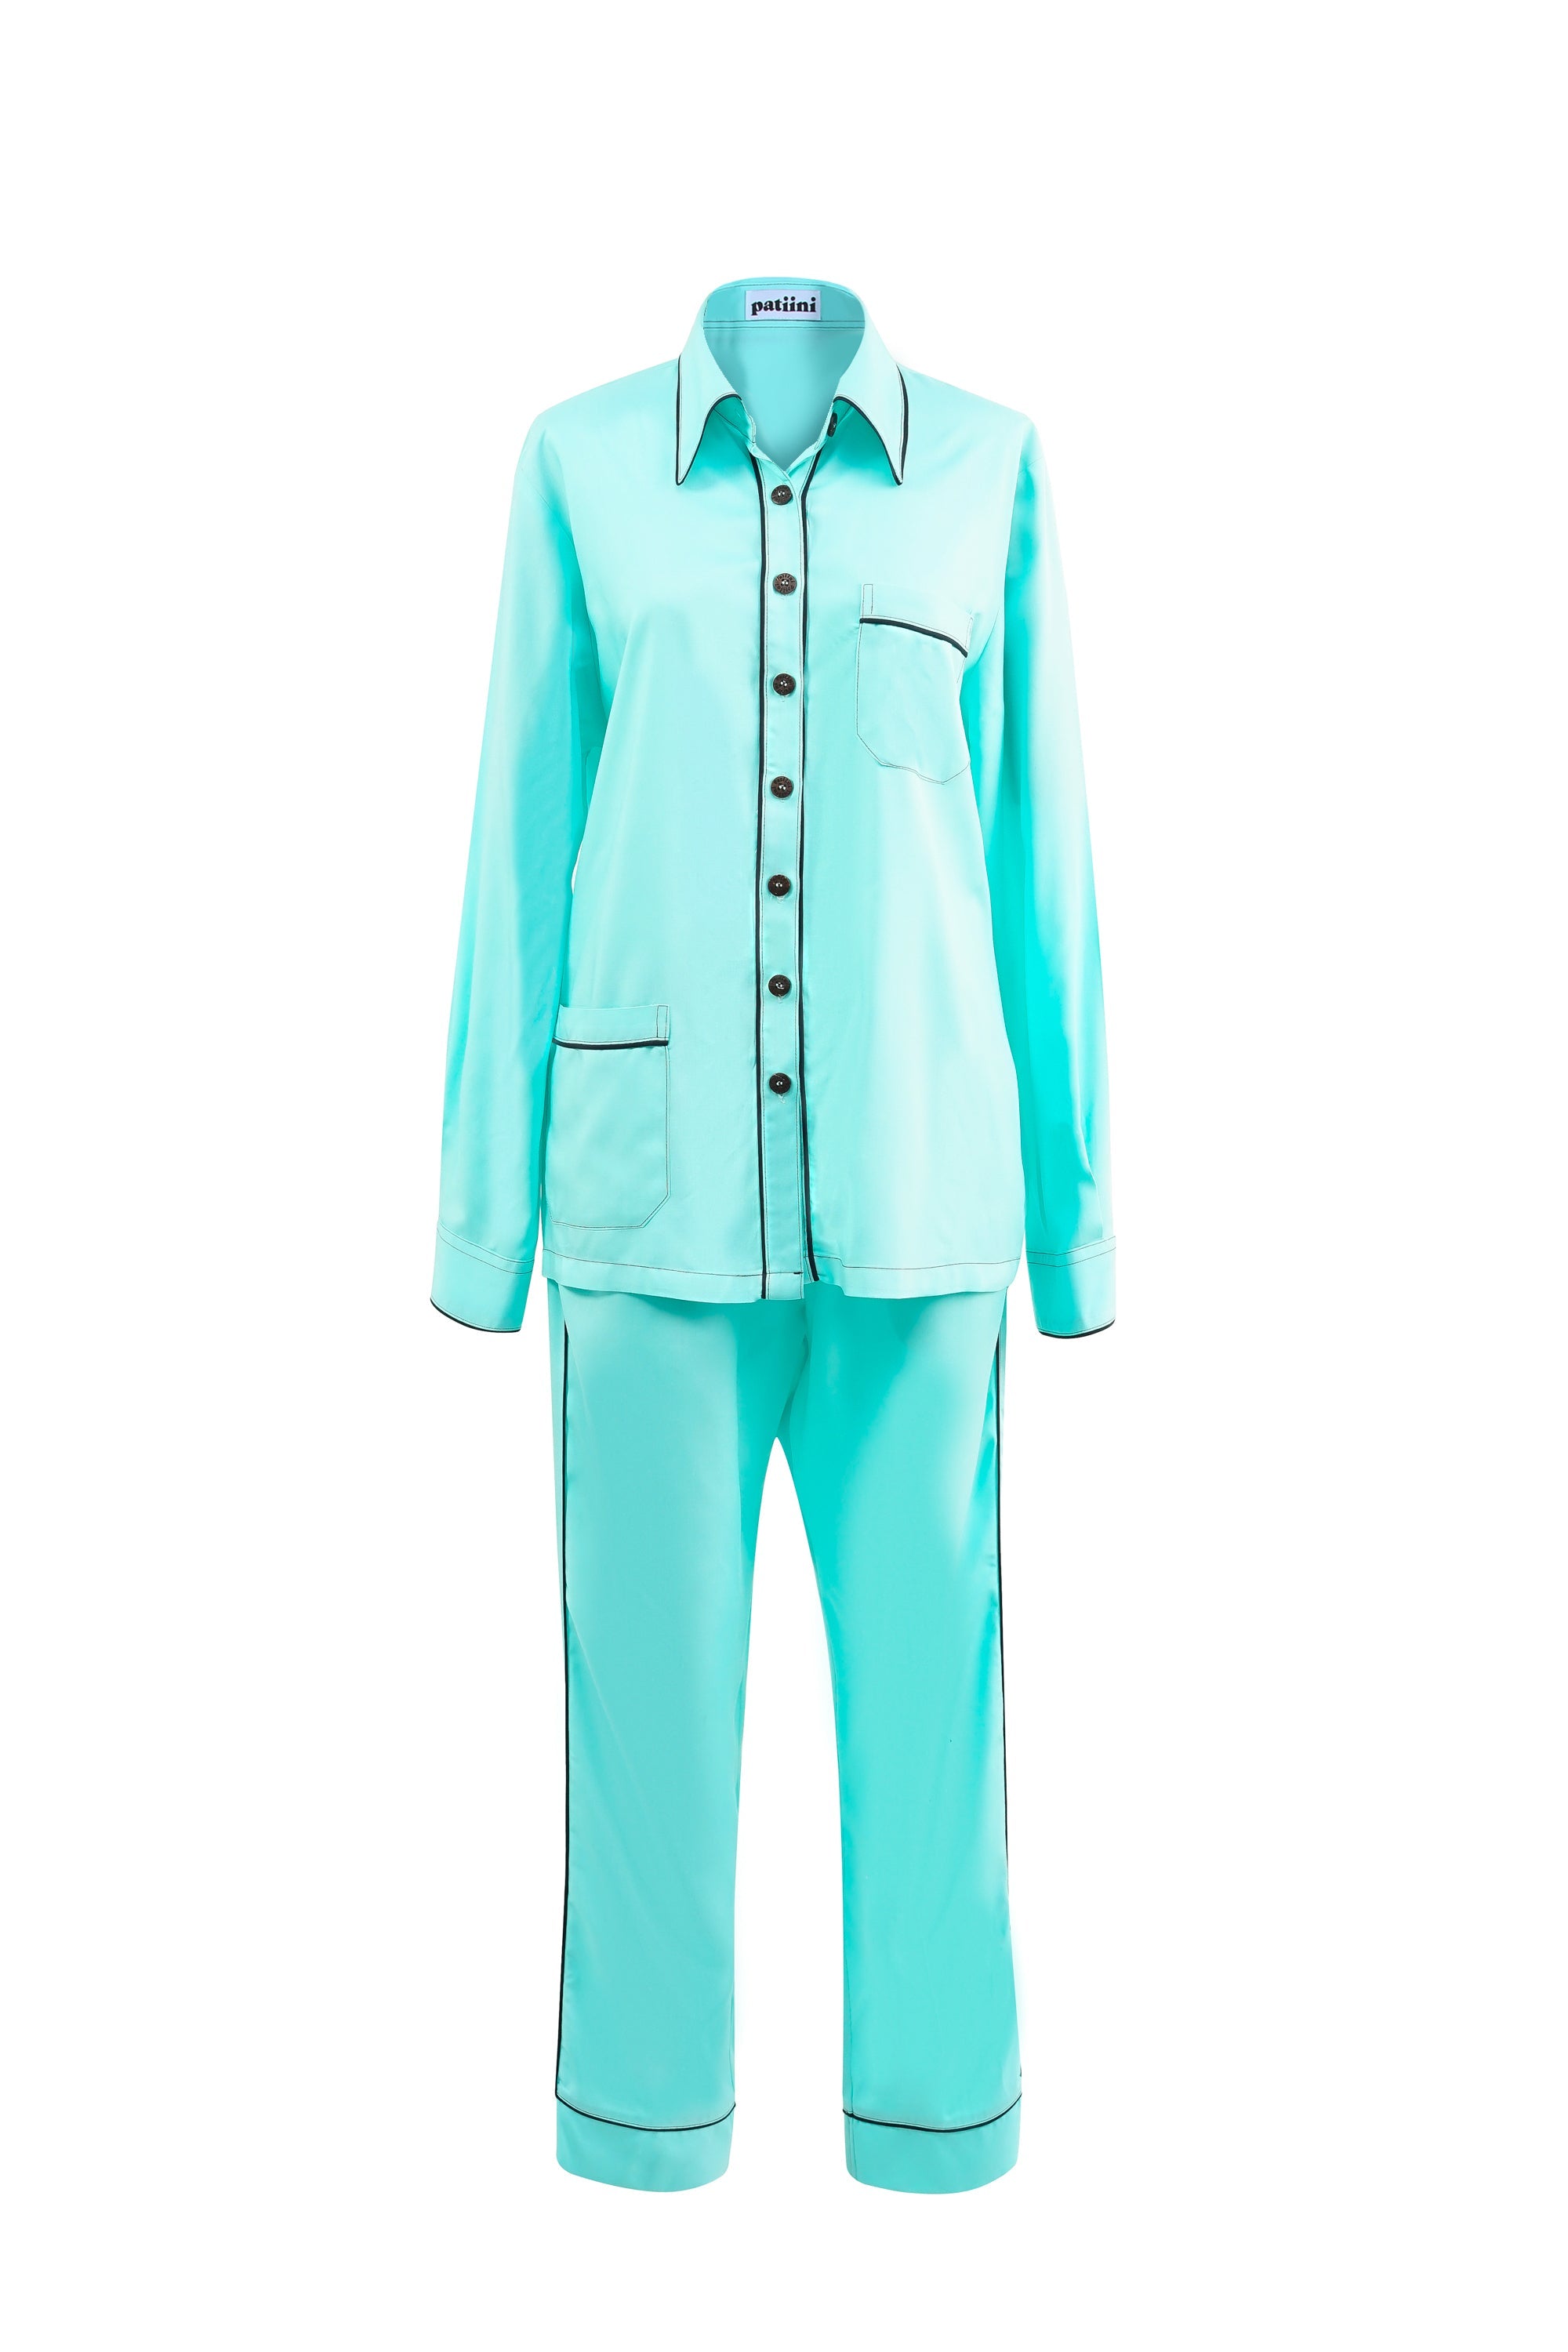 Teal long-sleeved pajama set with contrasting black piping.